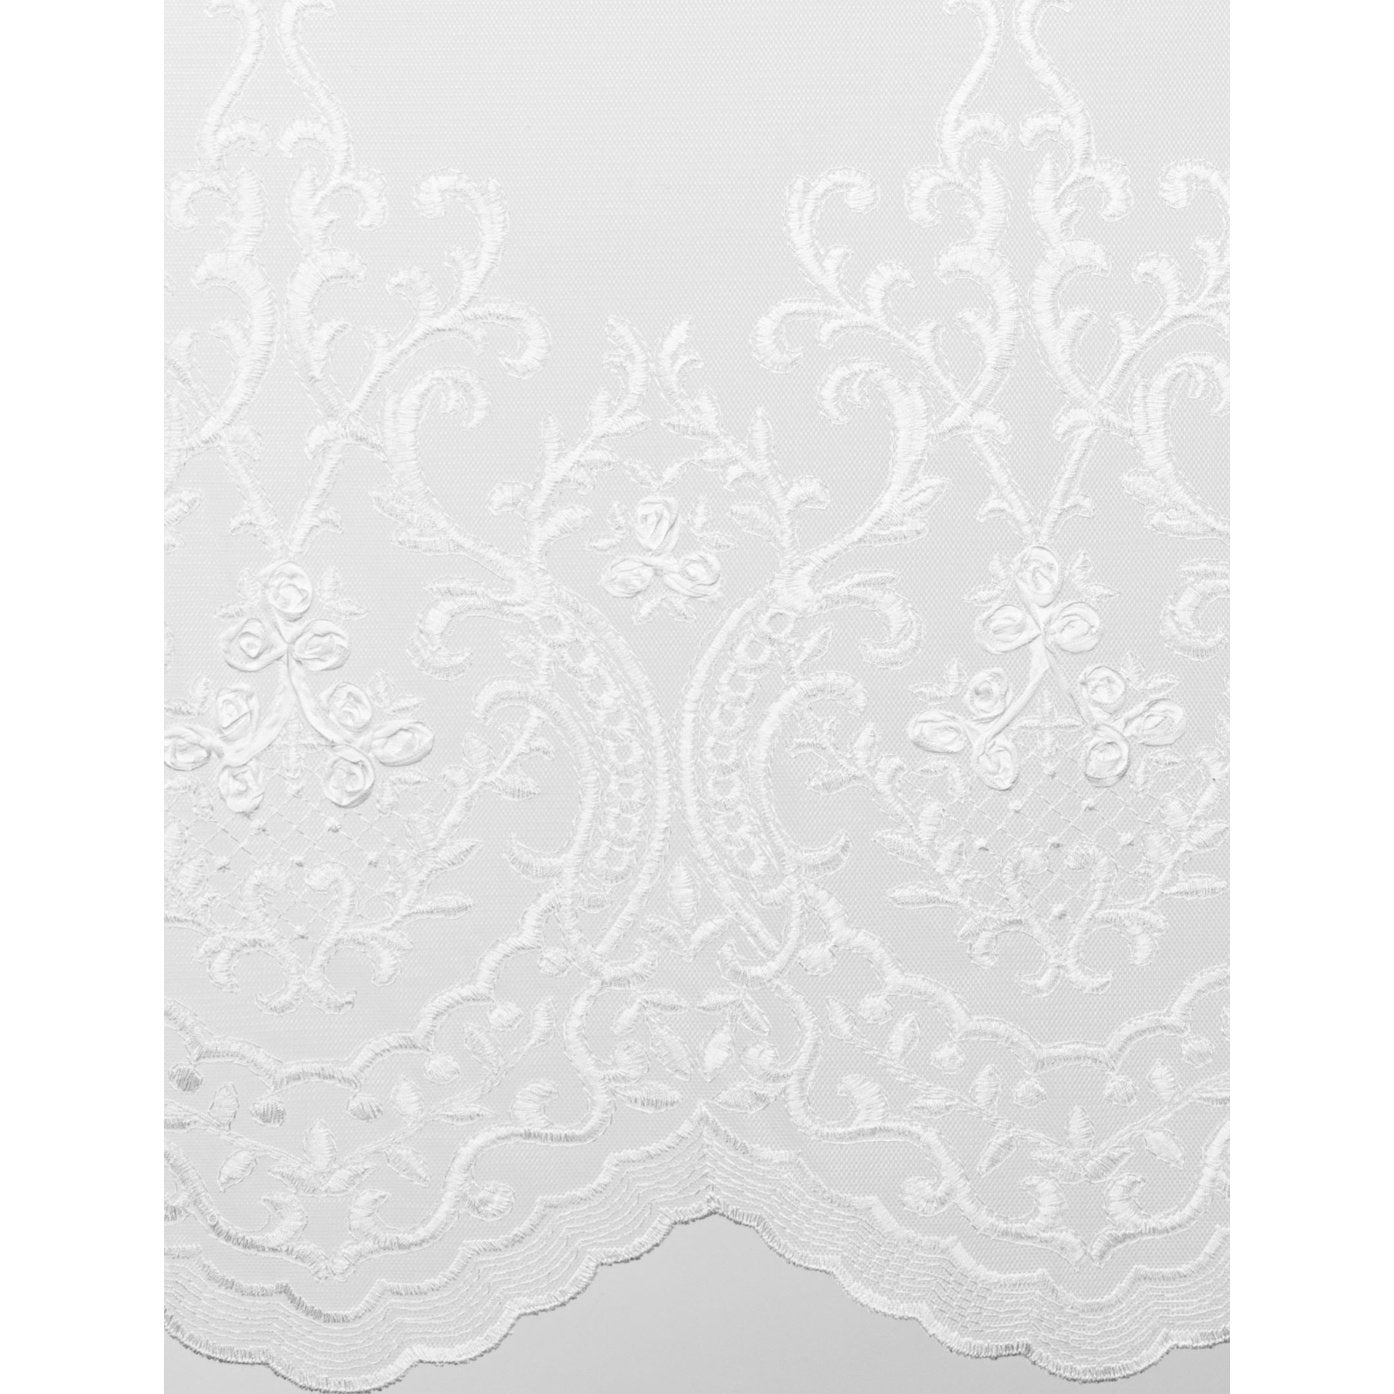 This luxurious embroidered lace tablecloth will transform your table in an instant! The beautiful and delicate embroidery make this tablecloth stand out. Despite its delicate look, this tablecloth can be machine washed without problems.  A perfect product for the host who only wants the best for her/his guests!   